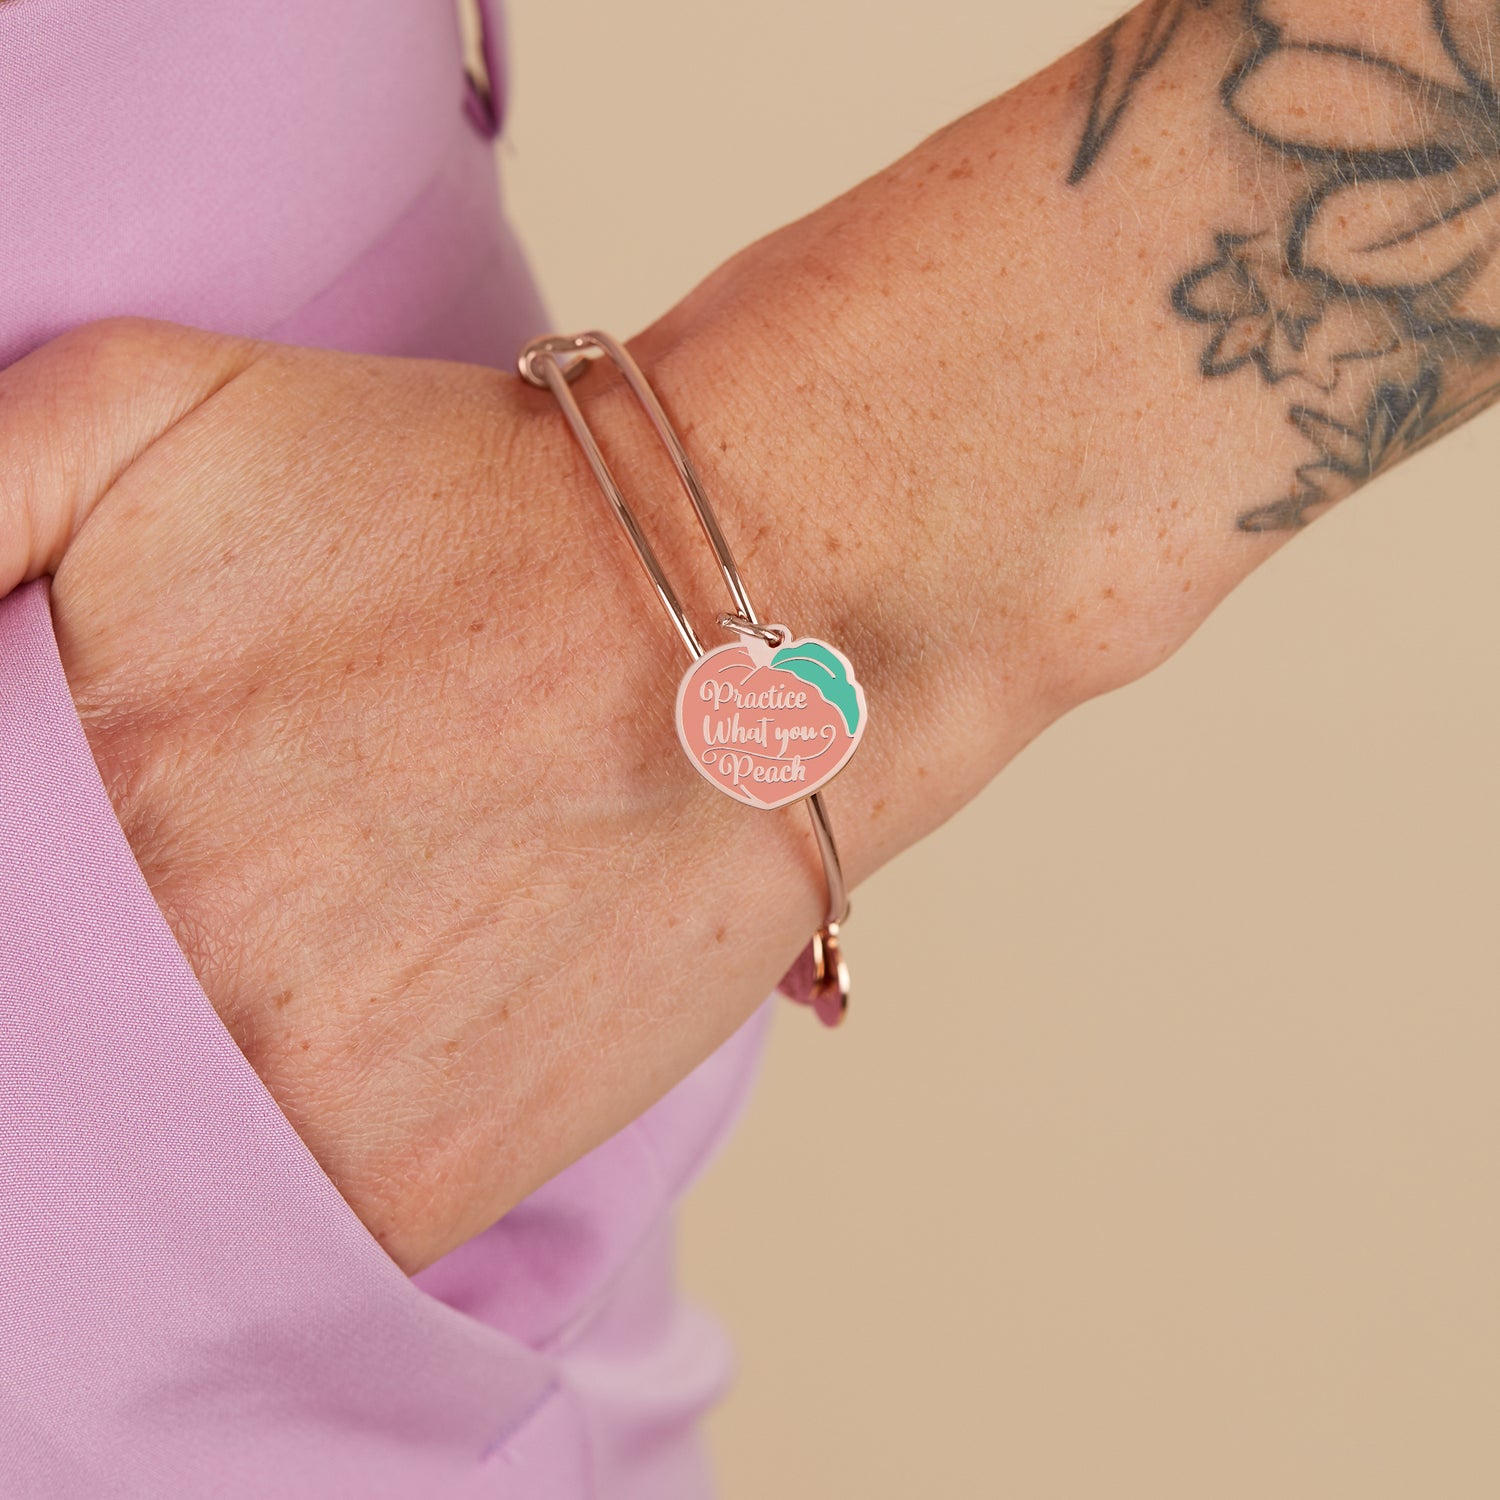 'Practice What You Peach' Charm Bangle